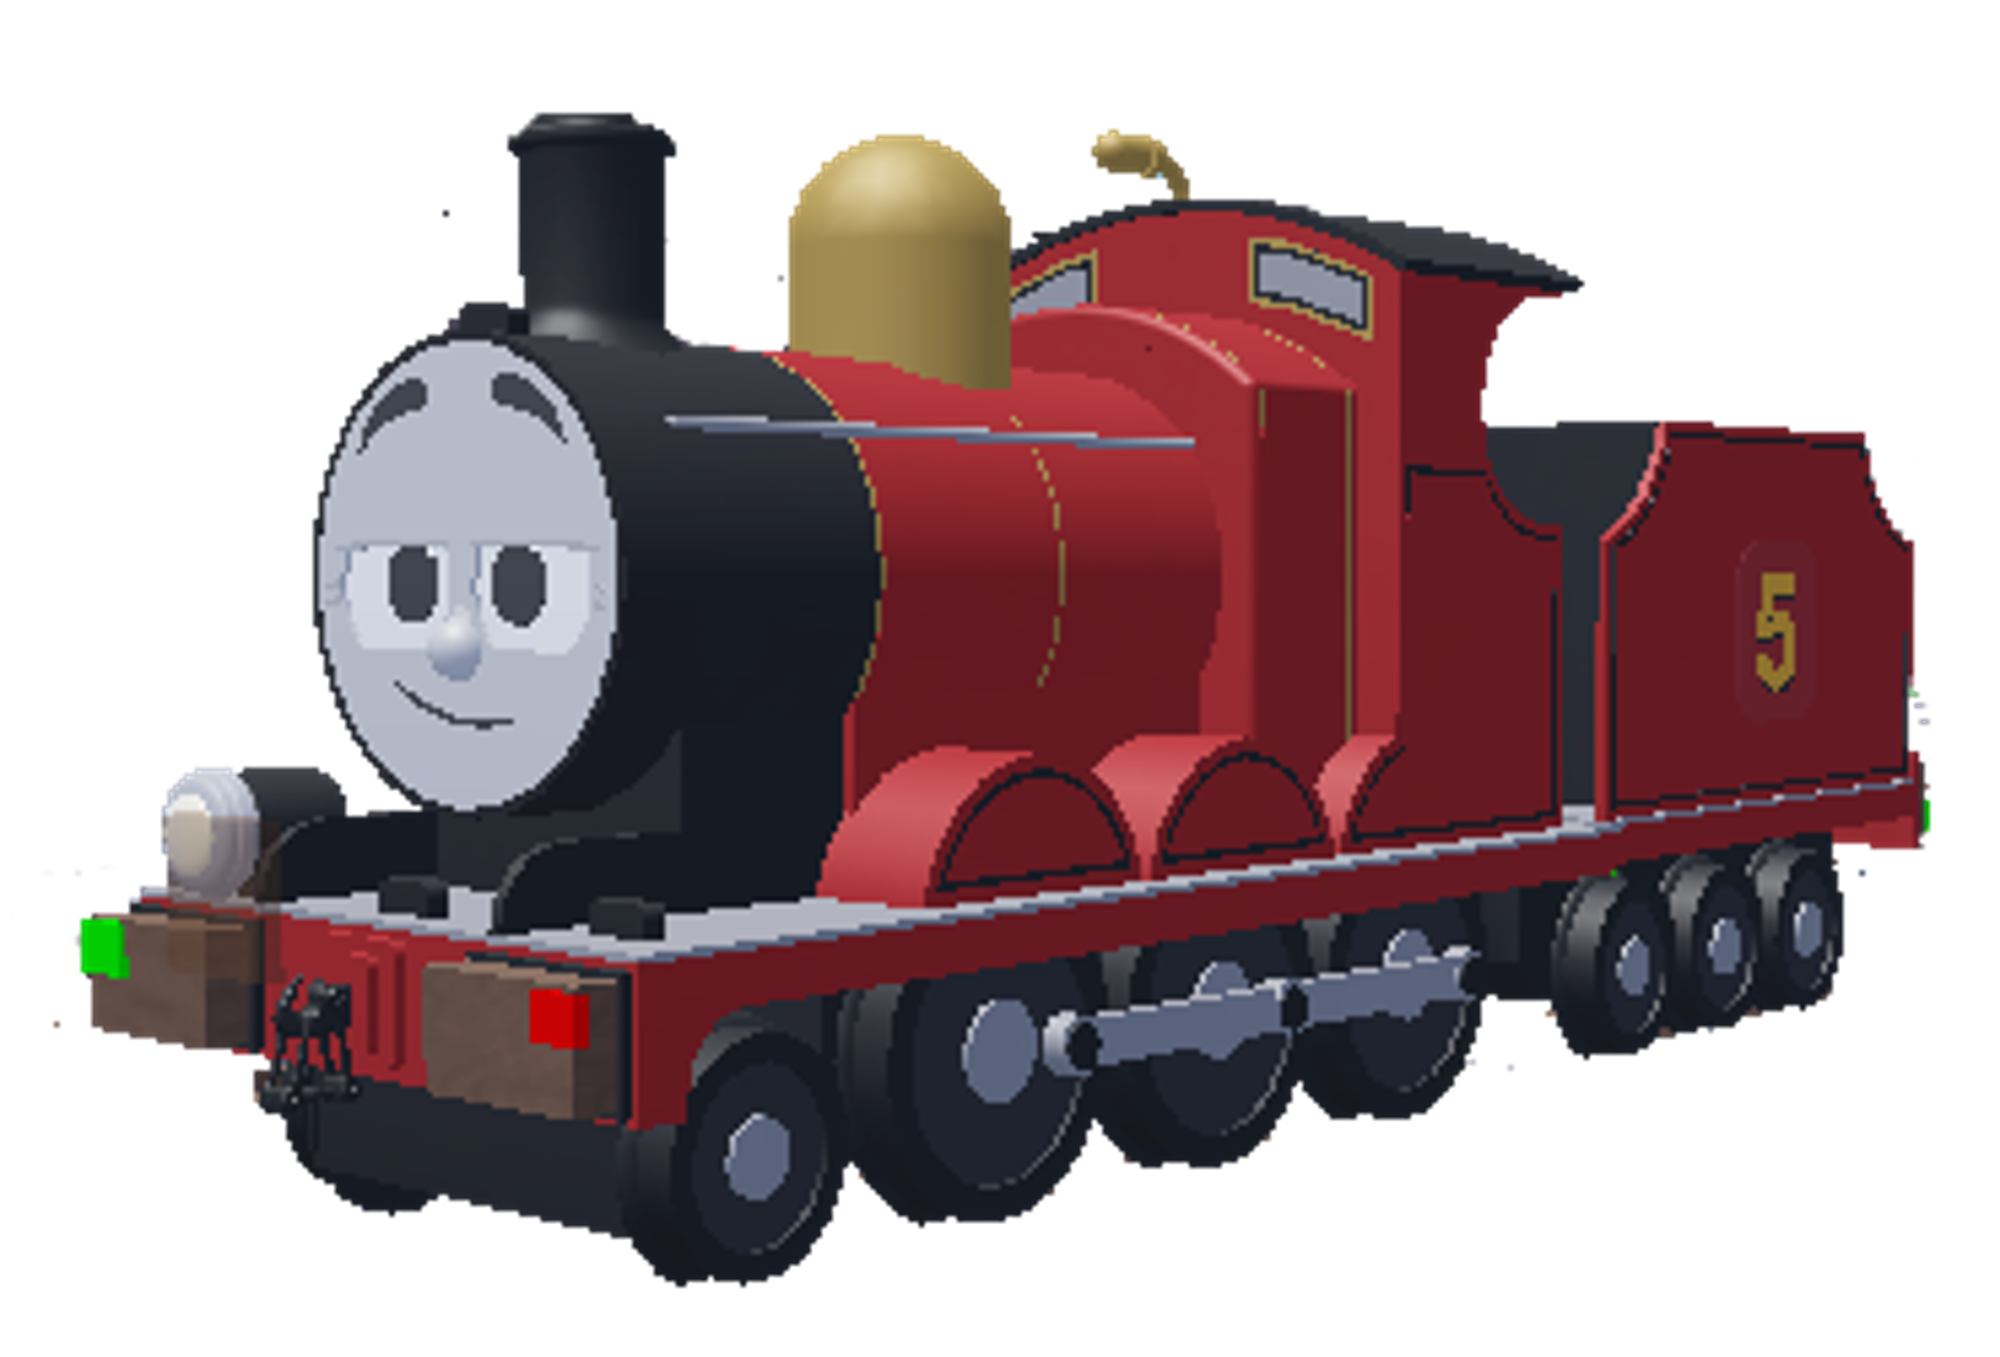 James The Red Engine (3D view) by Princess-Muffins on DeviantArt